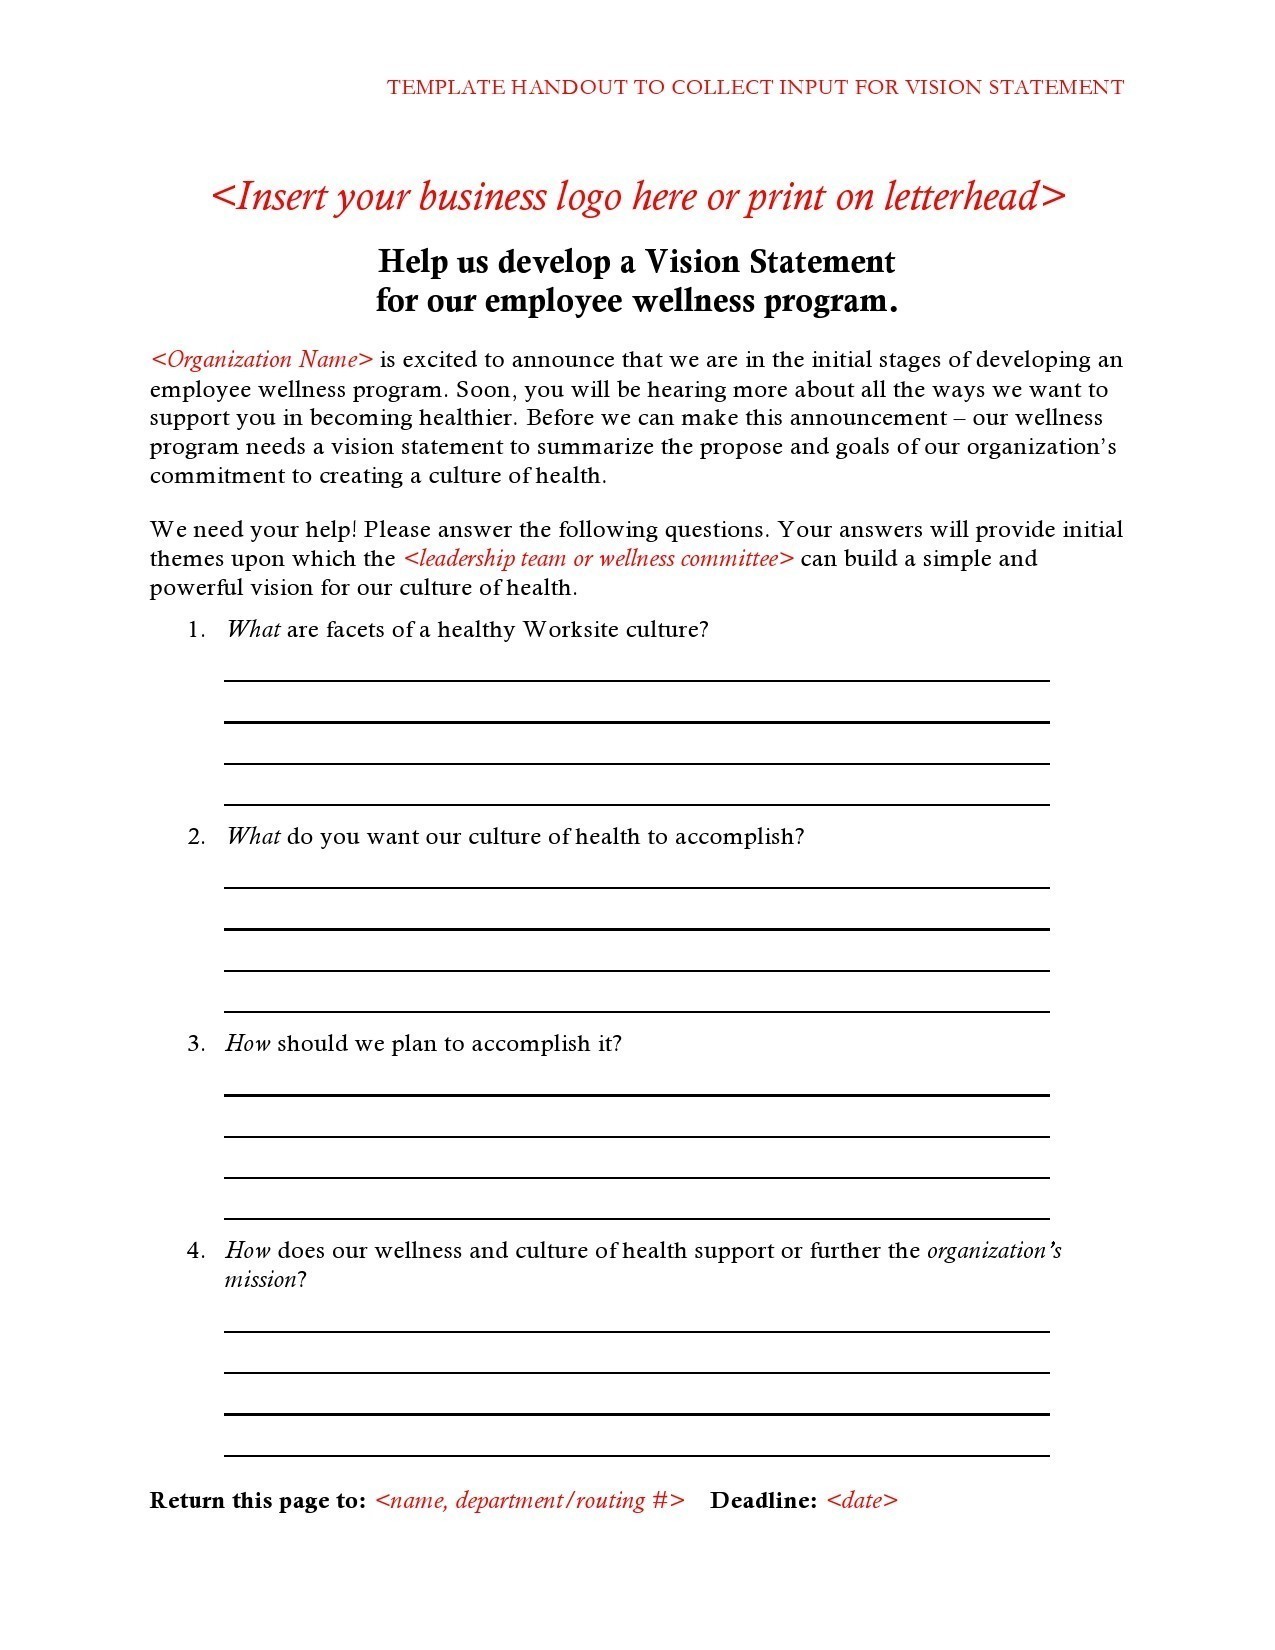 Free vision statement template 28